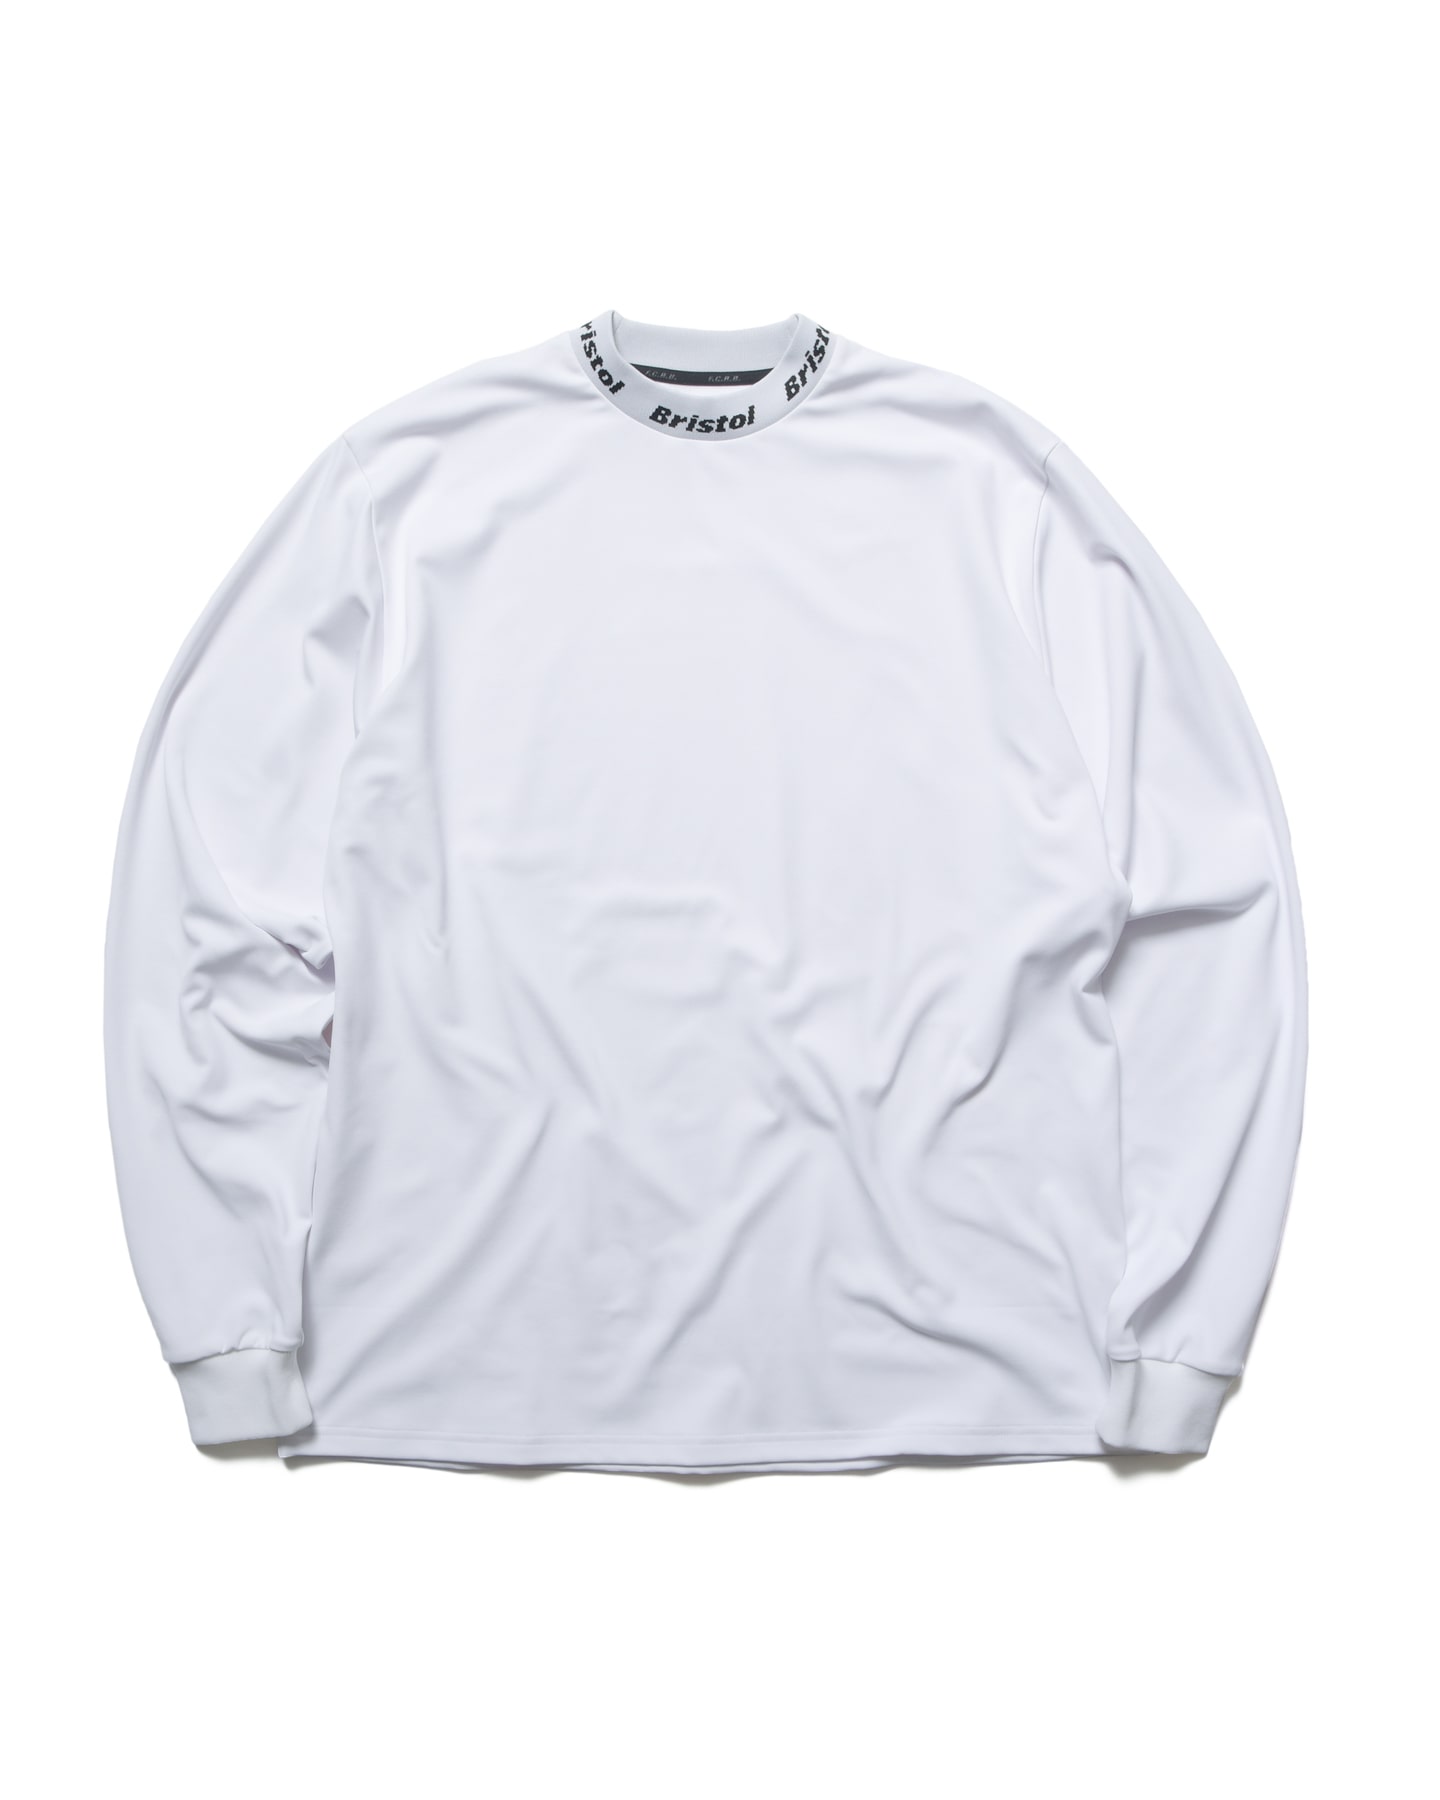 SOPH. | WINDPROOF NECK LOGO L/S BAGGY TOP(M WHITE):